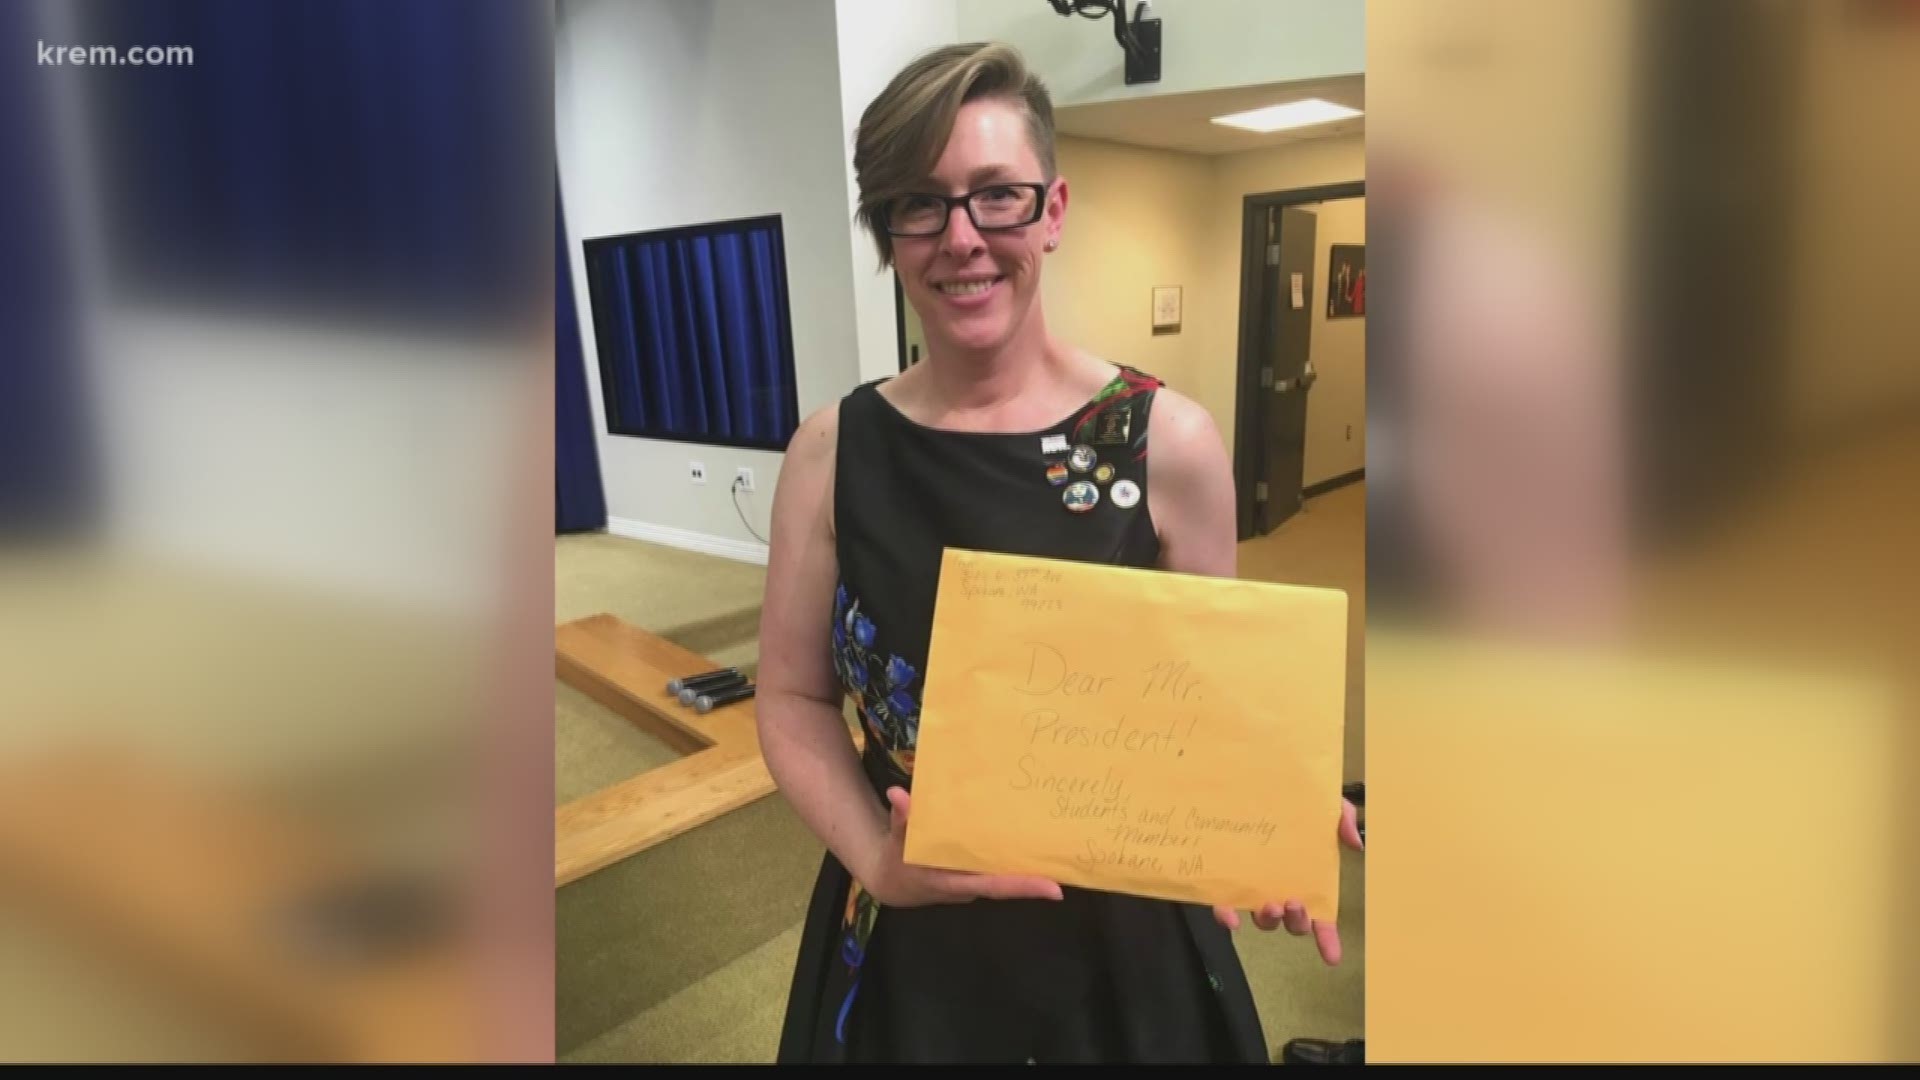 National Teacher of the Year Mandy Manning explains why she gave notes from students to Pres. Trump